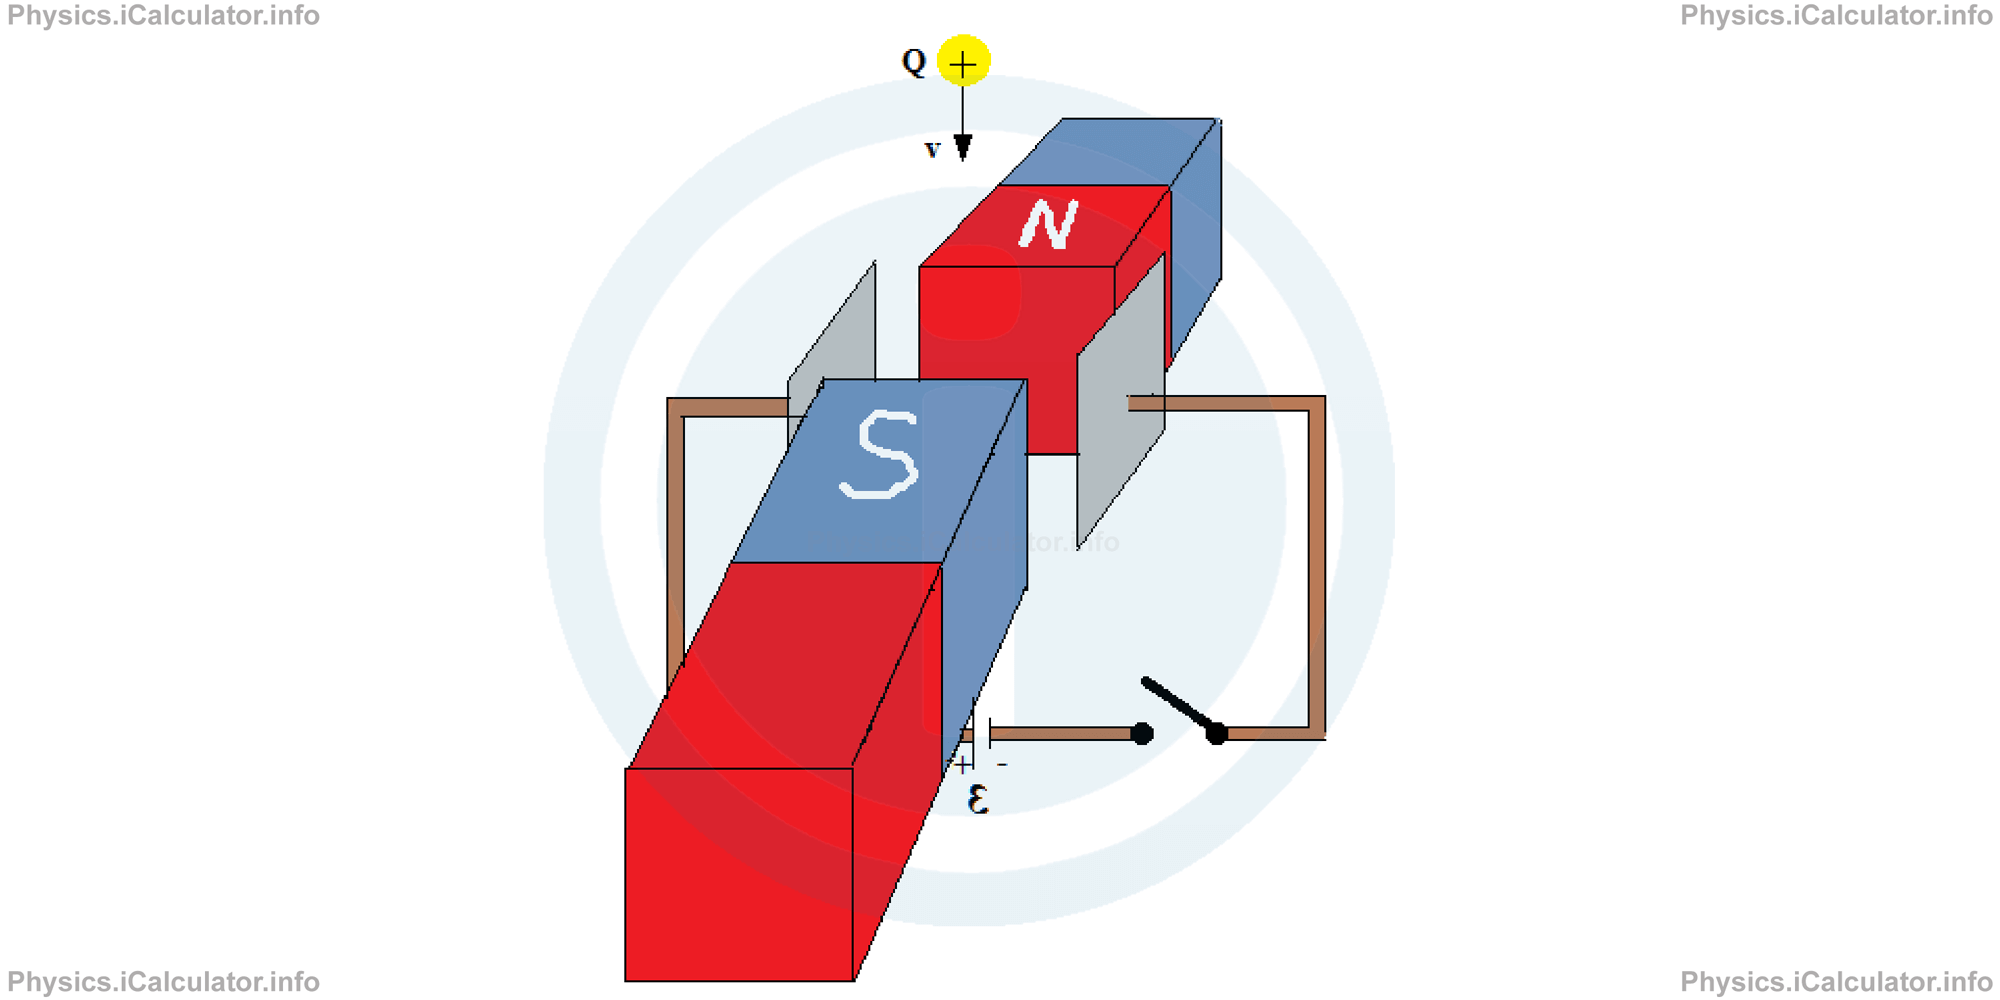 Physics Tutorials: This image provides visual information for the physics tutorial Magnetic Force on a Wire Moving Inside a Magnetic Field. Lorentz Force 